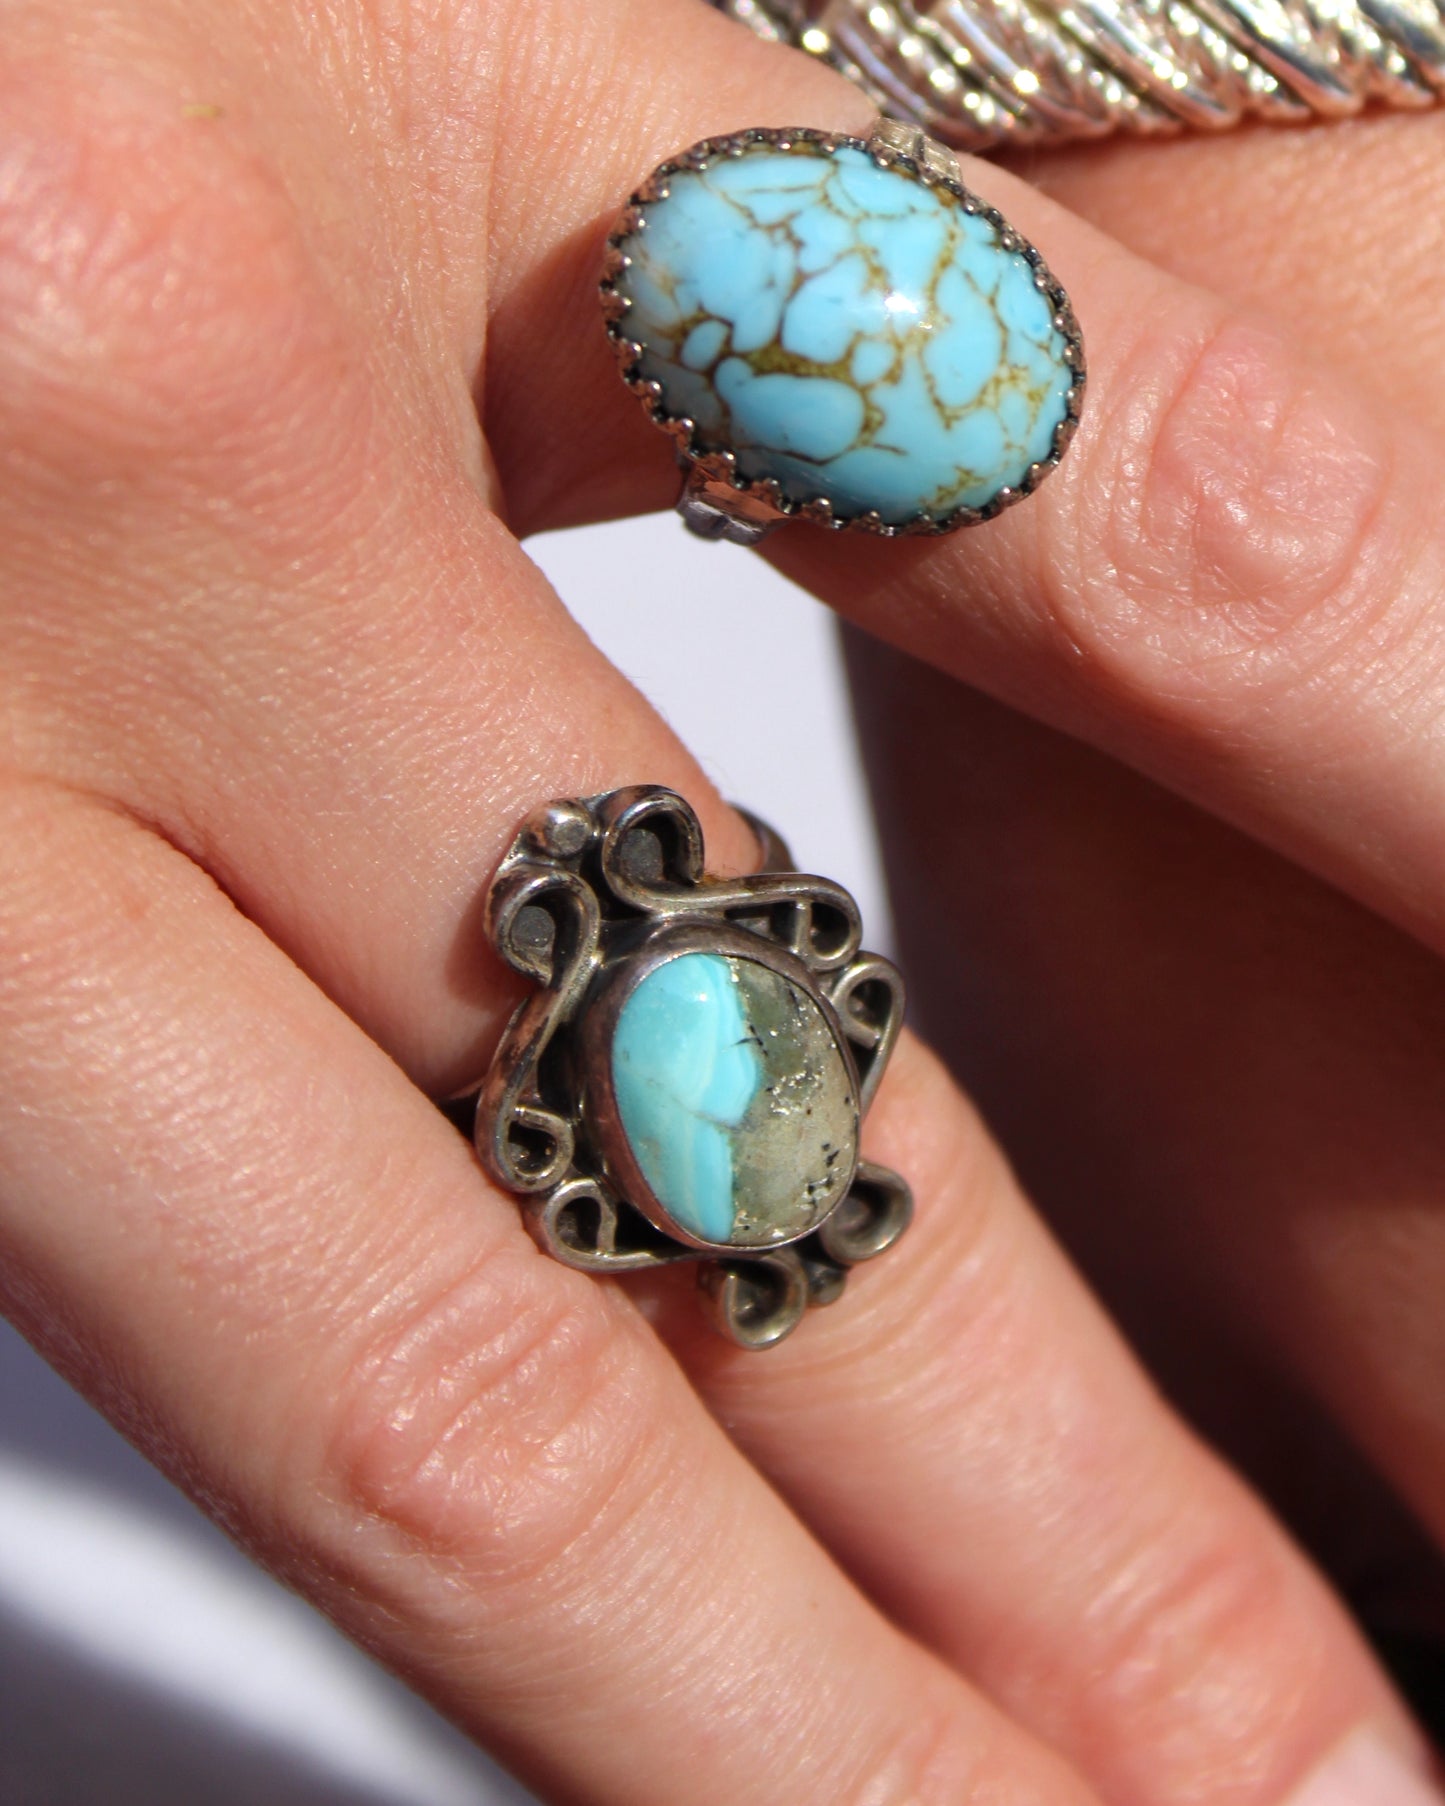 VINTAGE ARTISANAL TURQUOISE RING IN STERLING SILVER